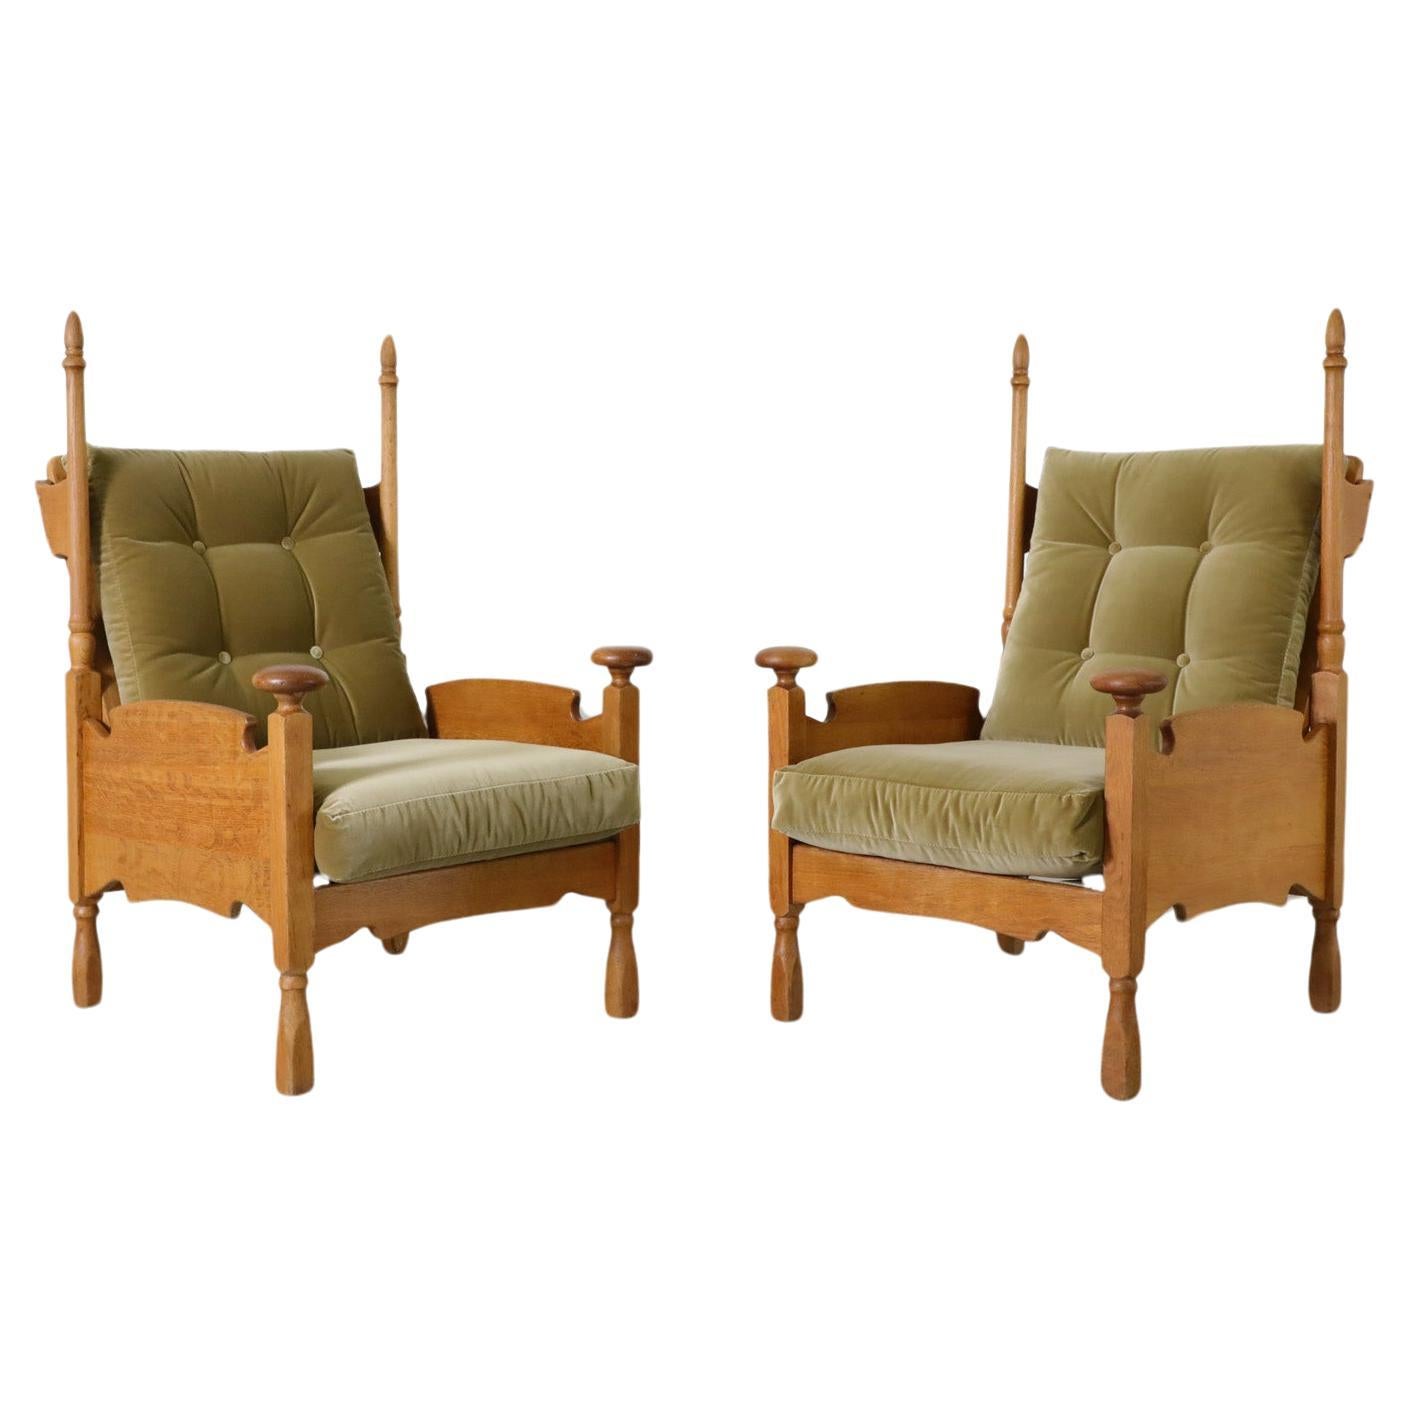 Pair of Brutalist Oak & Leaf Green Velvet Throne-Like Lounge Chairs w/ Finials For Sale